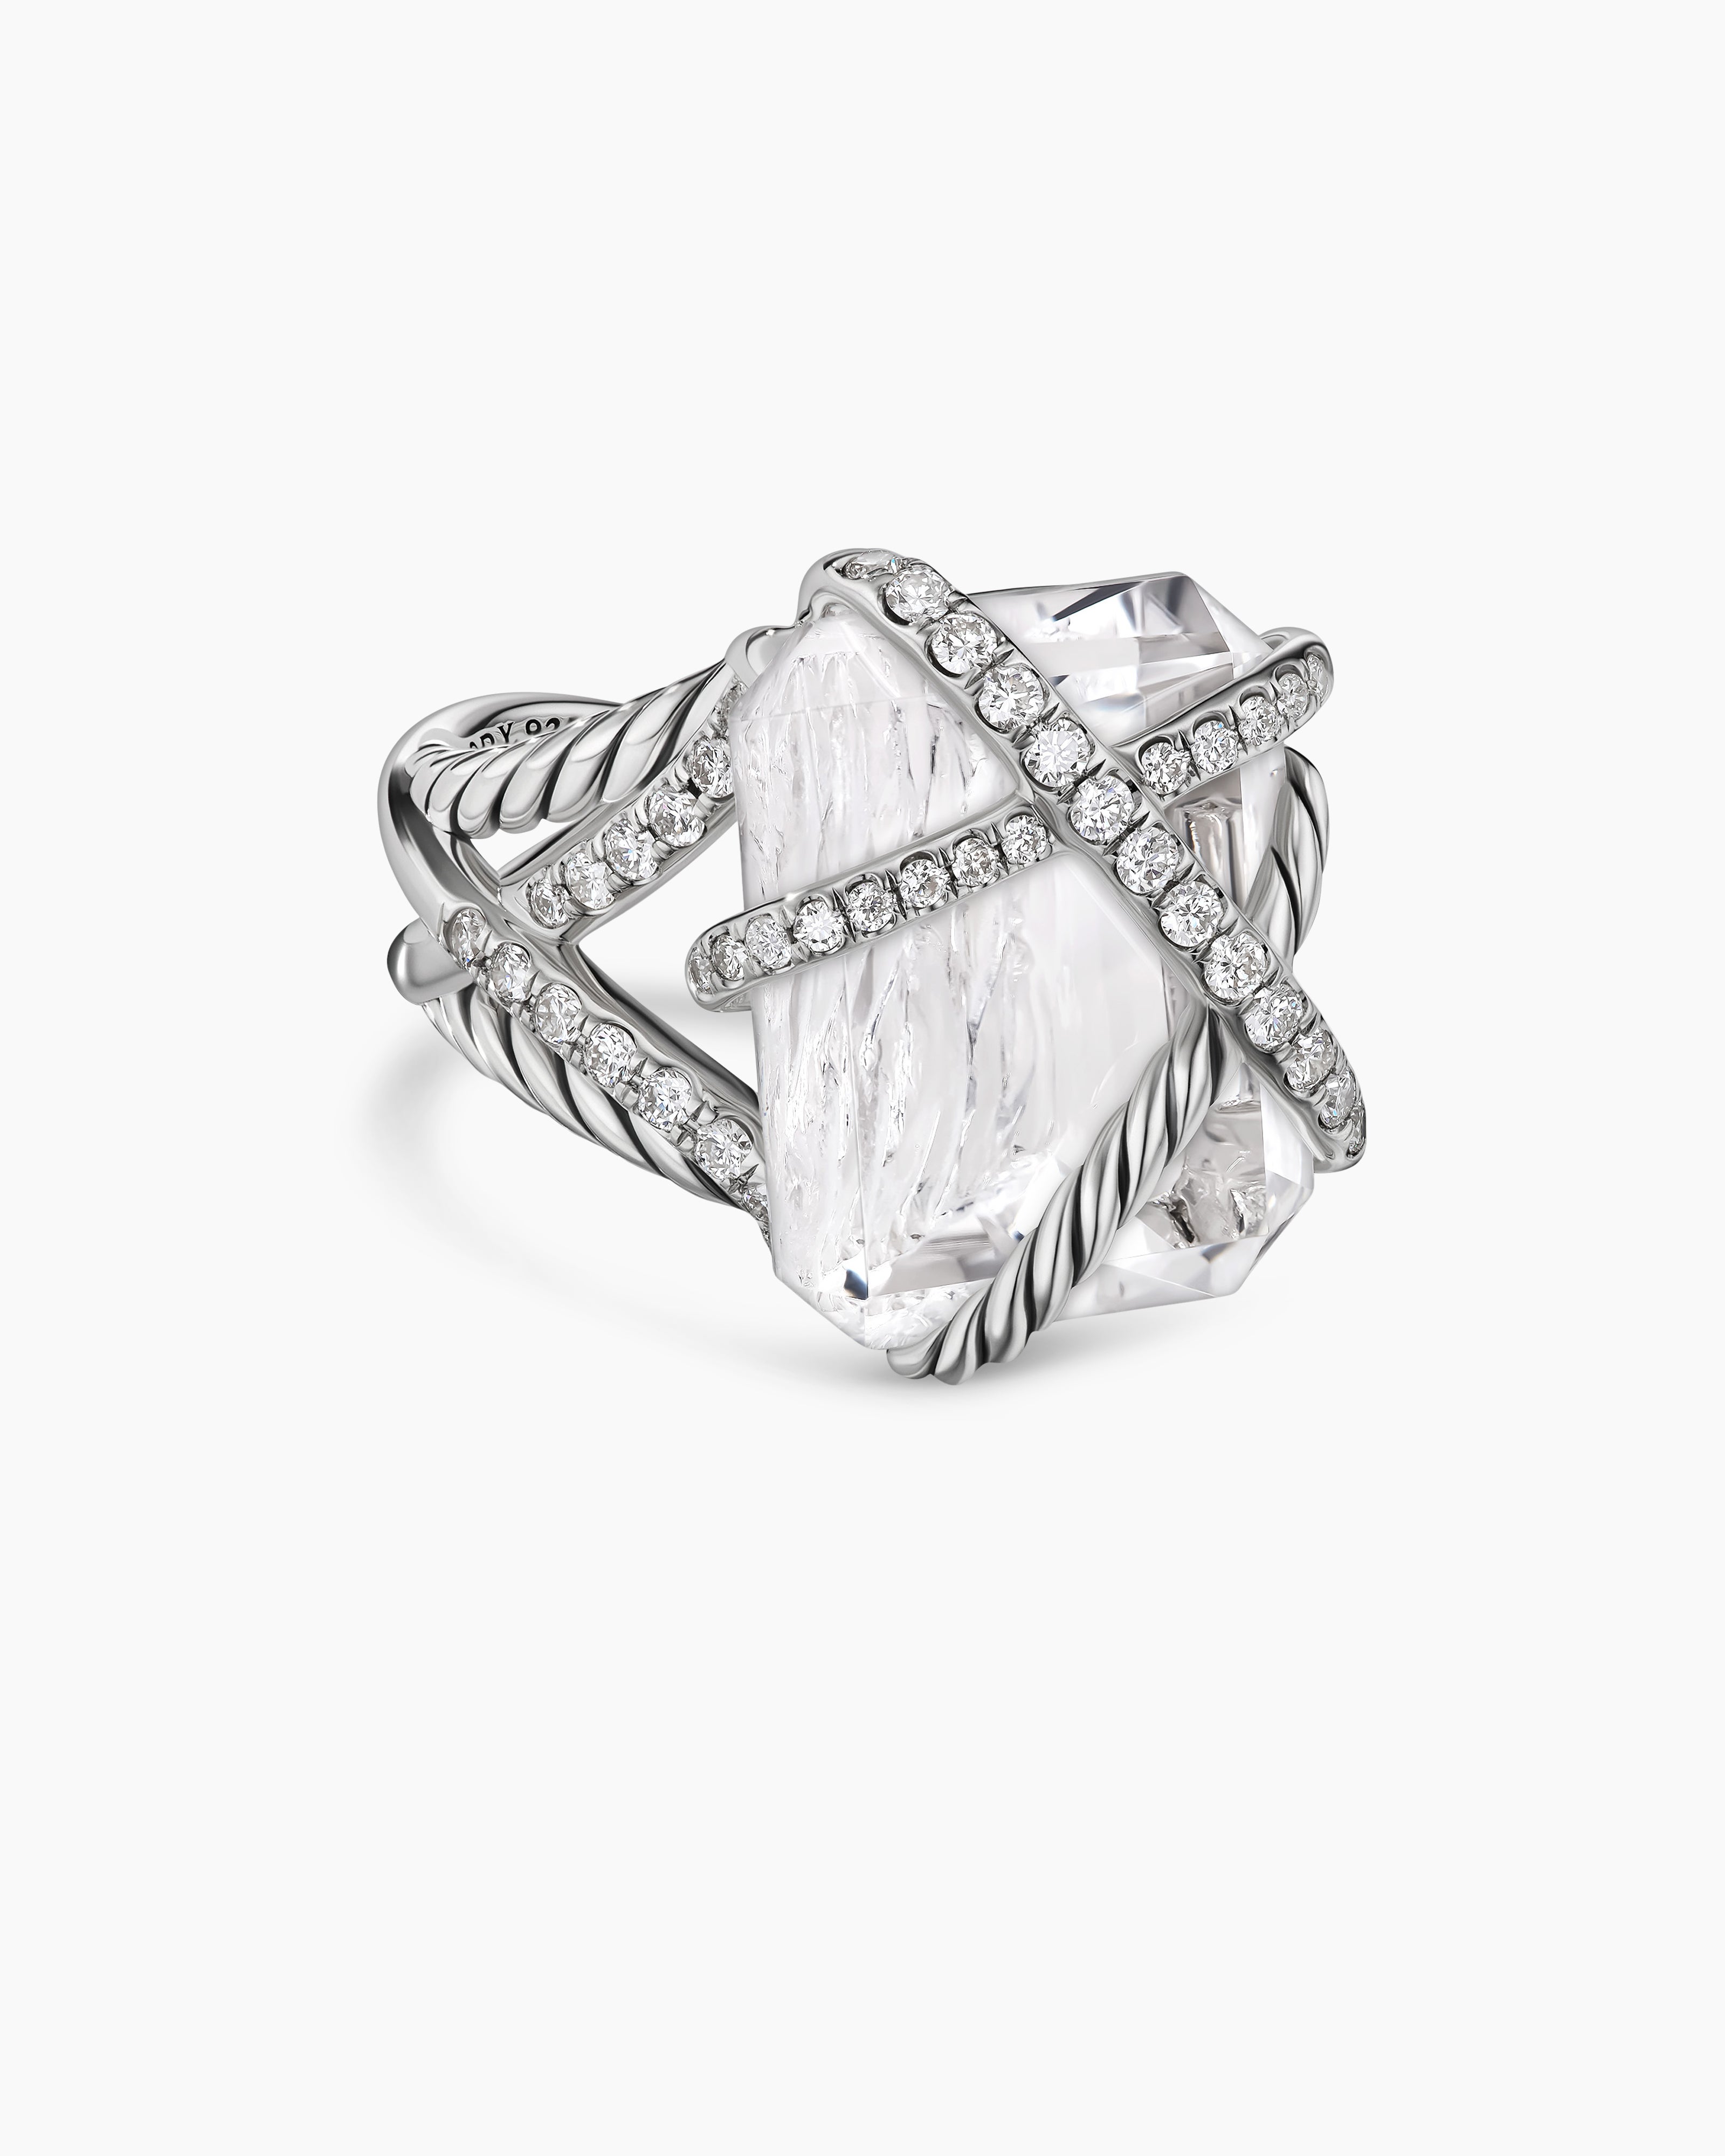 Cable Wrap Ring in Sterling Silver with Diamonds, 20.4mm | David